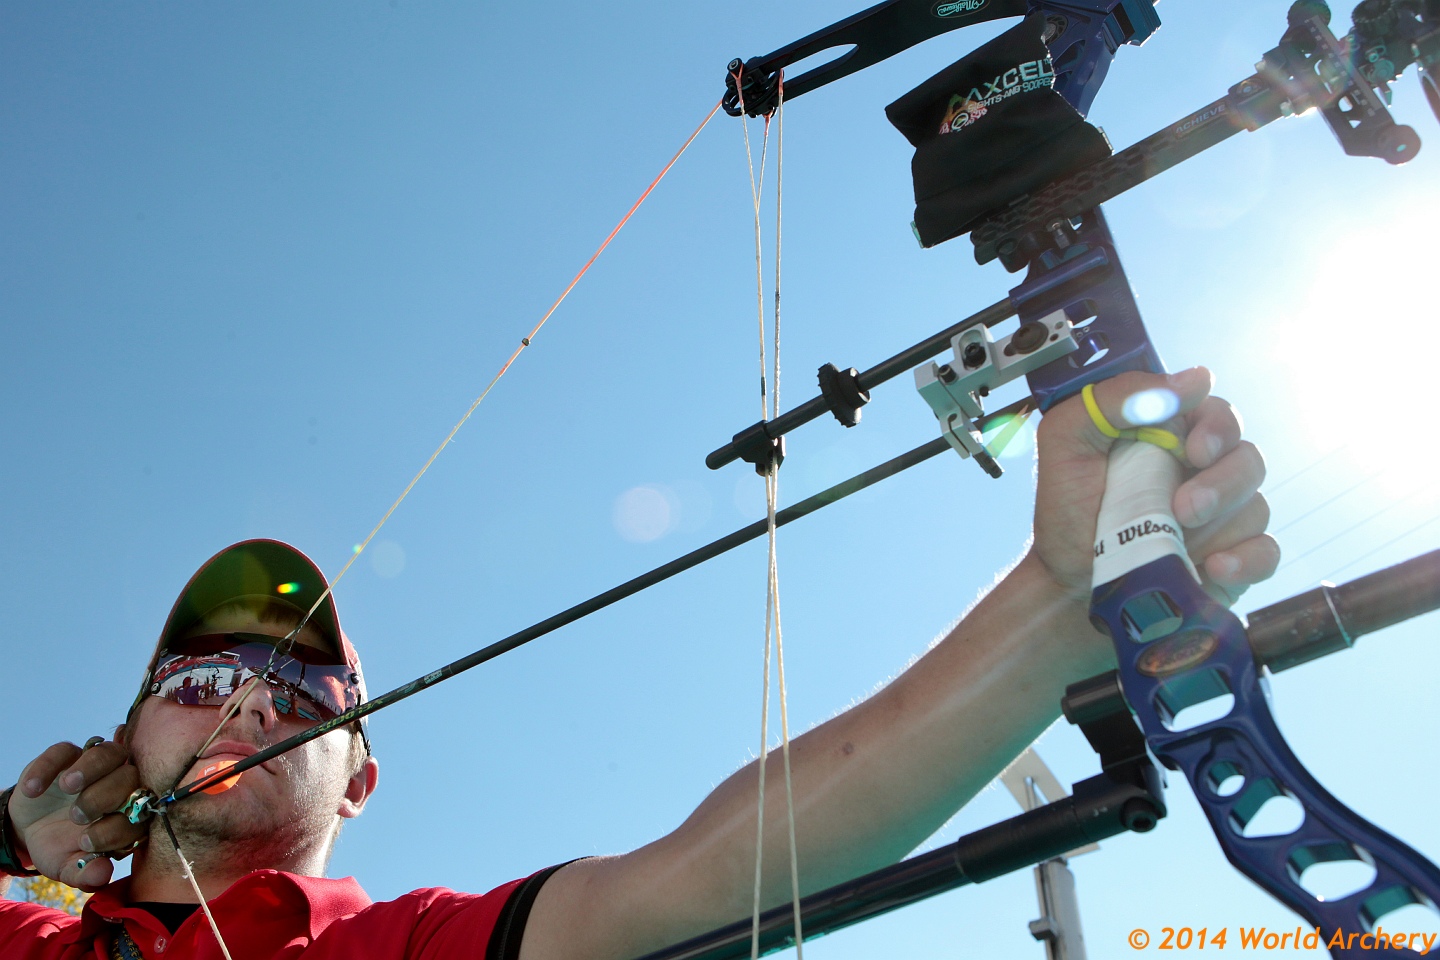  World Archery appointed Broadreach Media as worldwide distributor and media consultants.  The 2019 Hyundai World Archery Championships reached over 77 million people across 265 hours of live, delayed, highlights and news programming in 14 key market